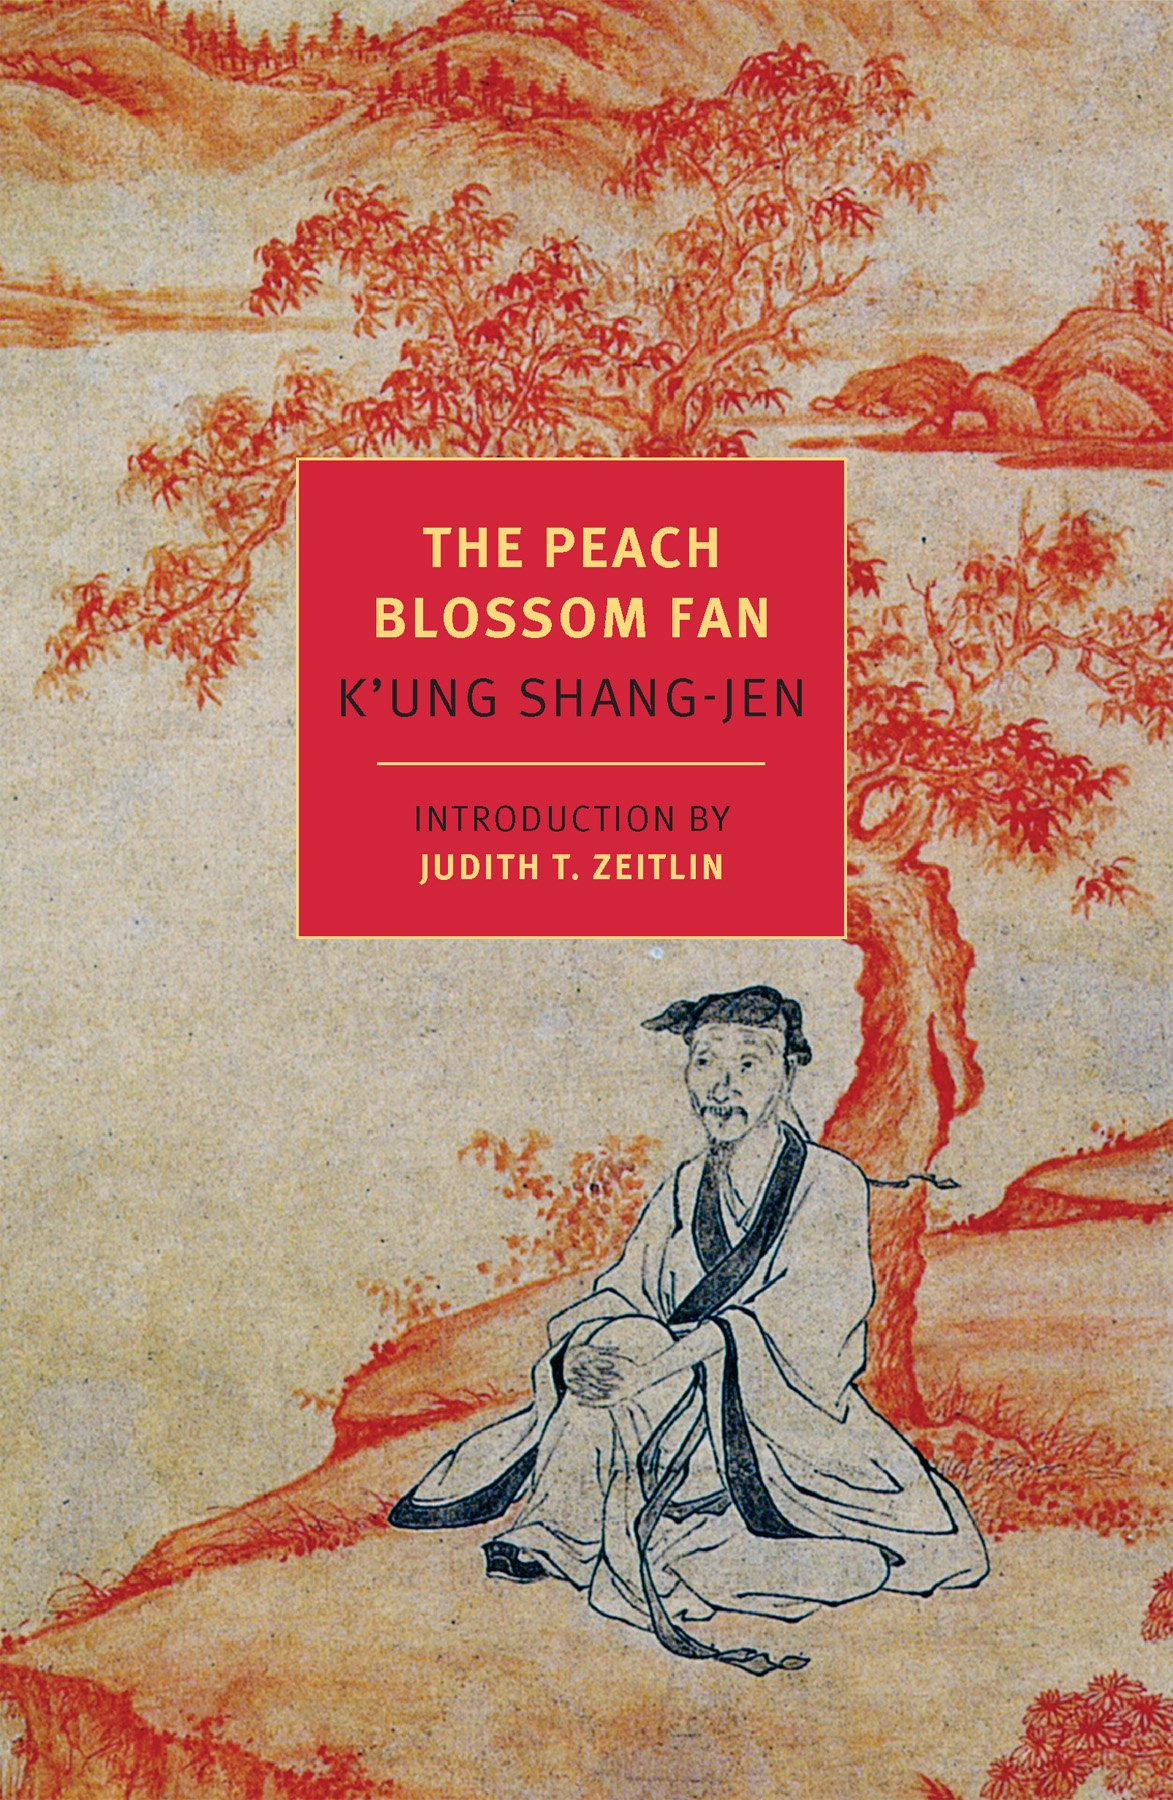 KUNG SHANG-JEN 16461718 was a sixty-fourth generation descendant of Confucius - photo 1